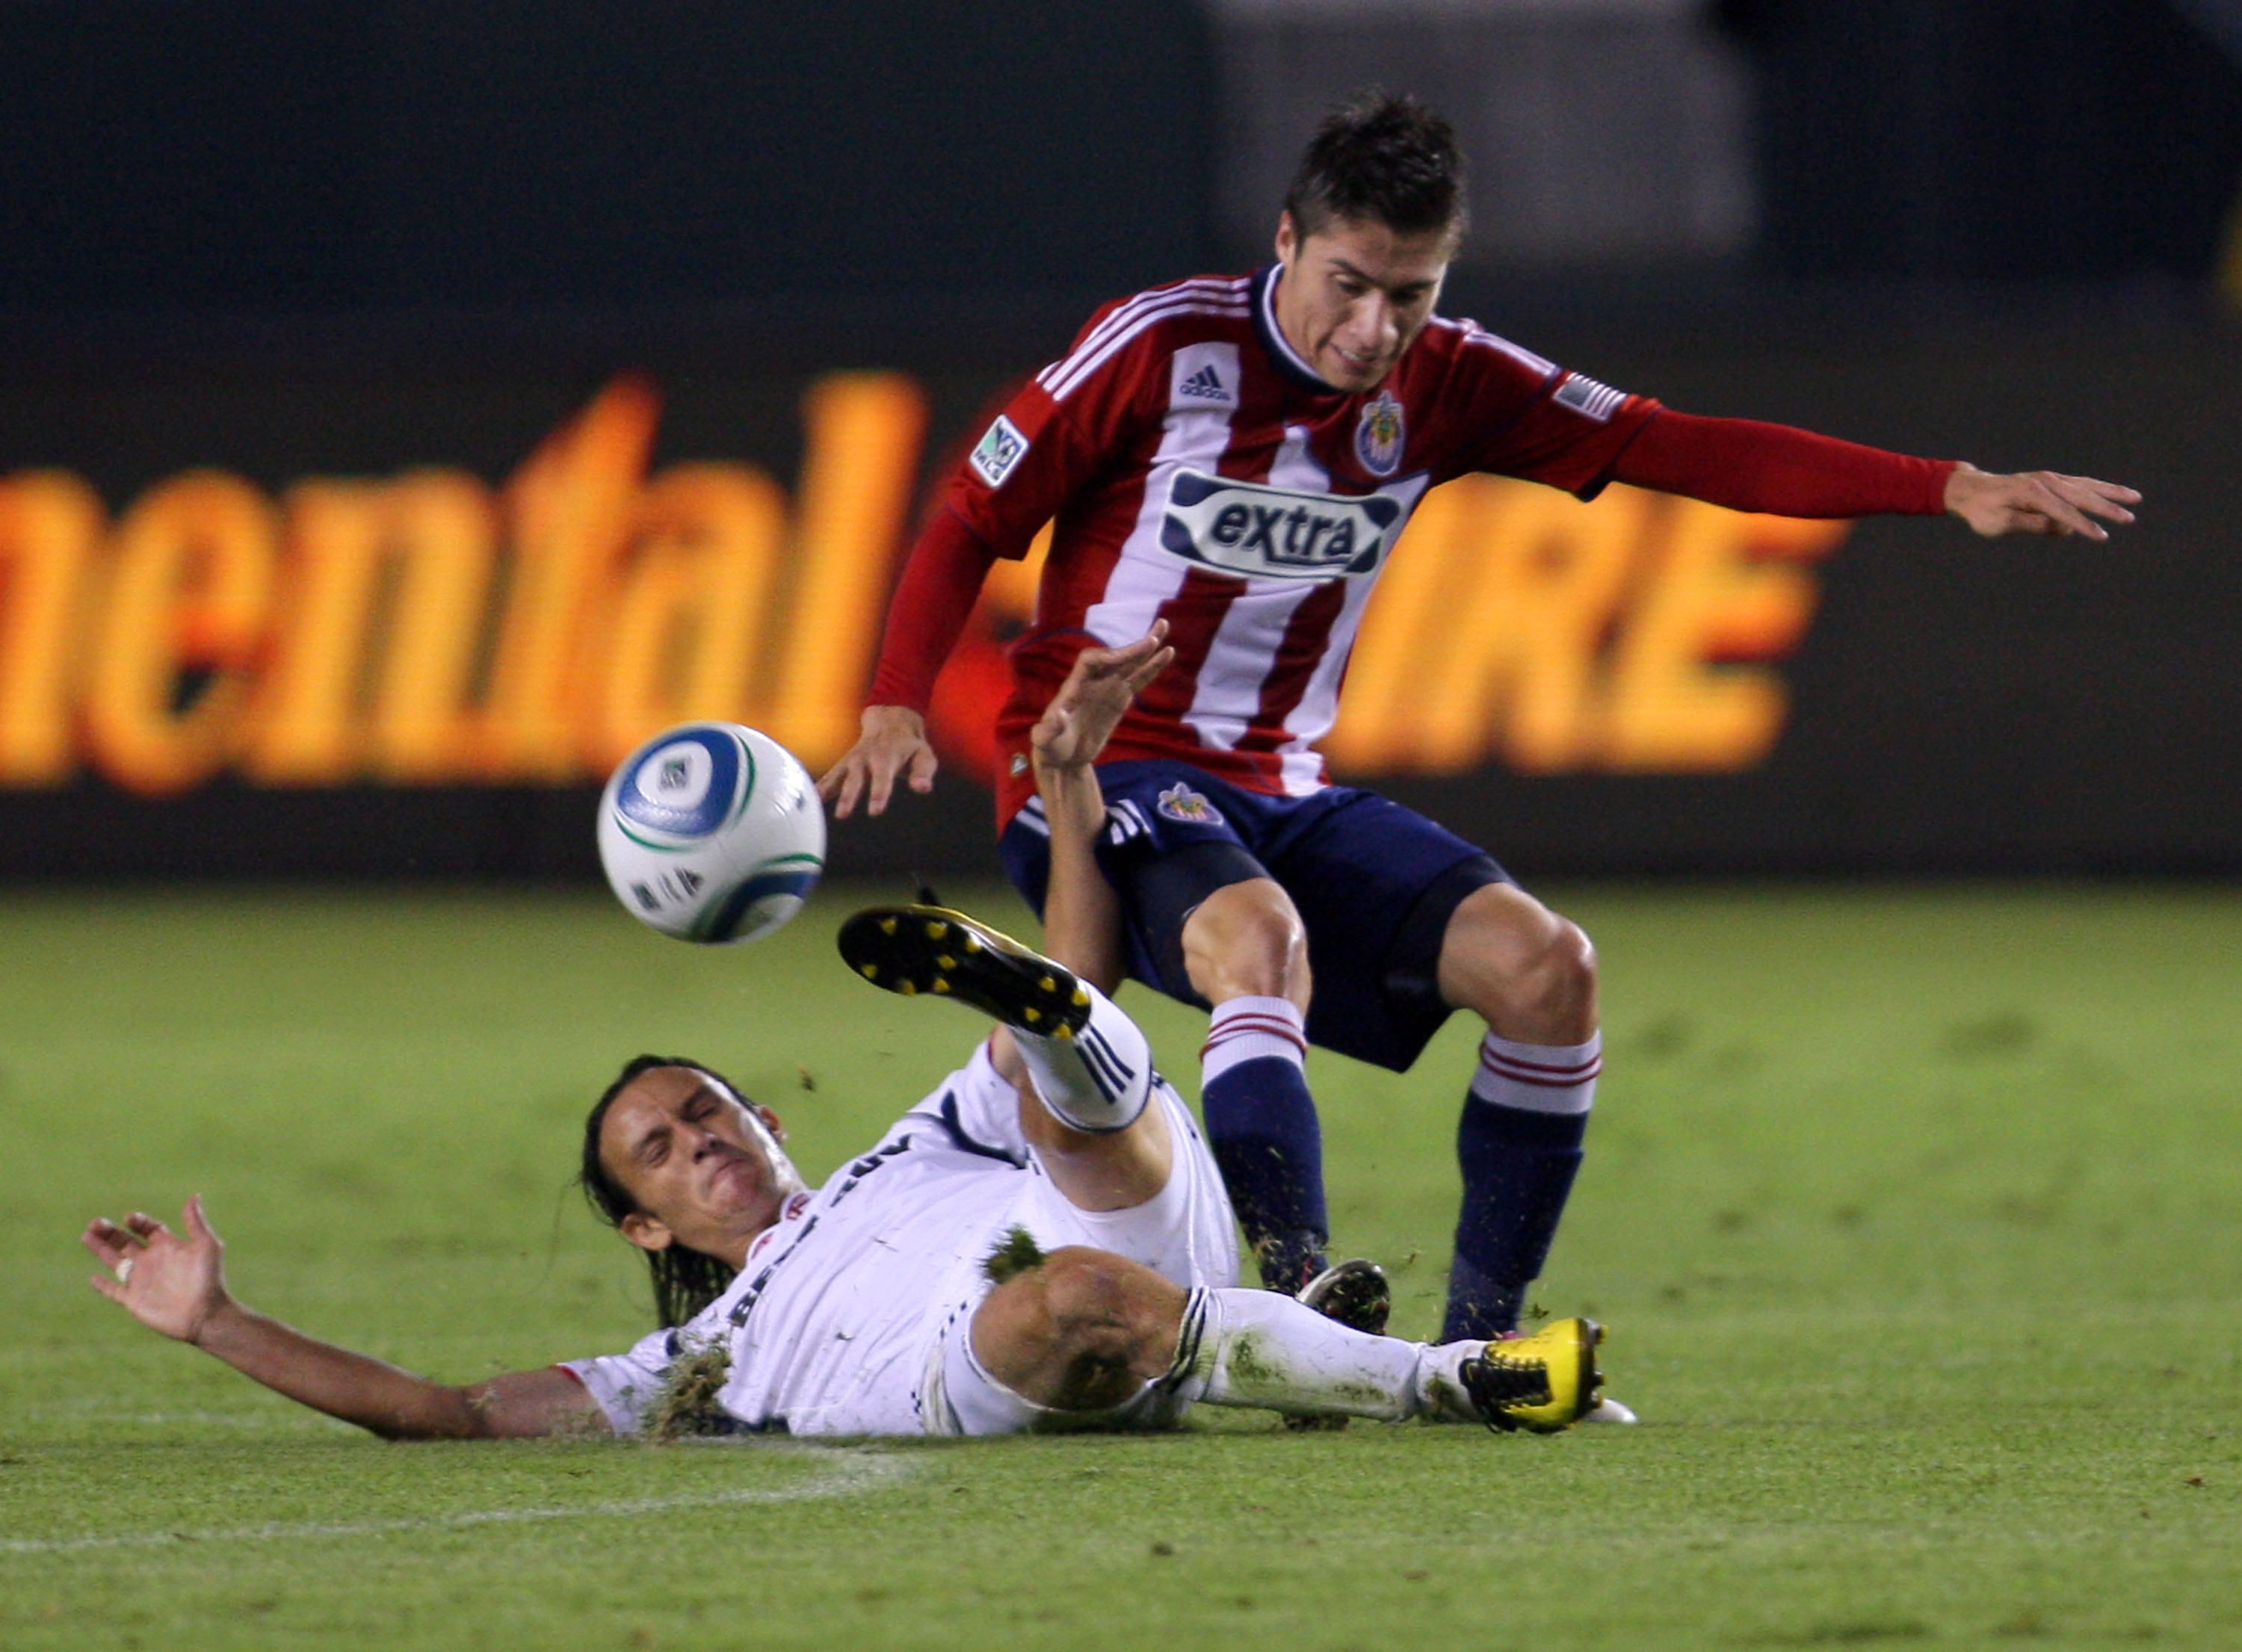 CARSON, CA - OCTOBER 23:  Jorge Flores #19 of Chivas USA and Bratislav Ristic #77 of the Chicago Fire vie for the ball in the first half during the MLS match on October 23, 2010 in Carson, California. The Fire defeated Chivas USA 4-1.  (Photo by Victor De